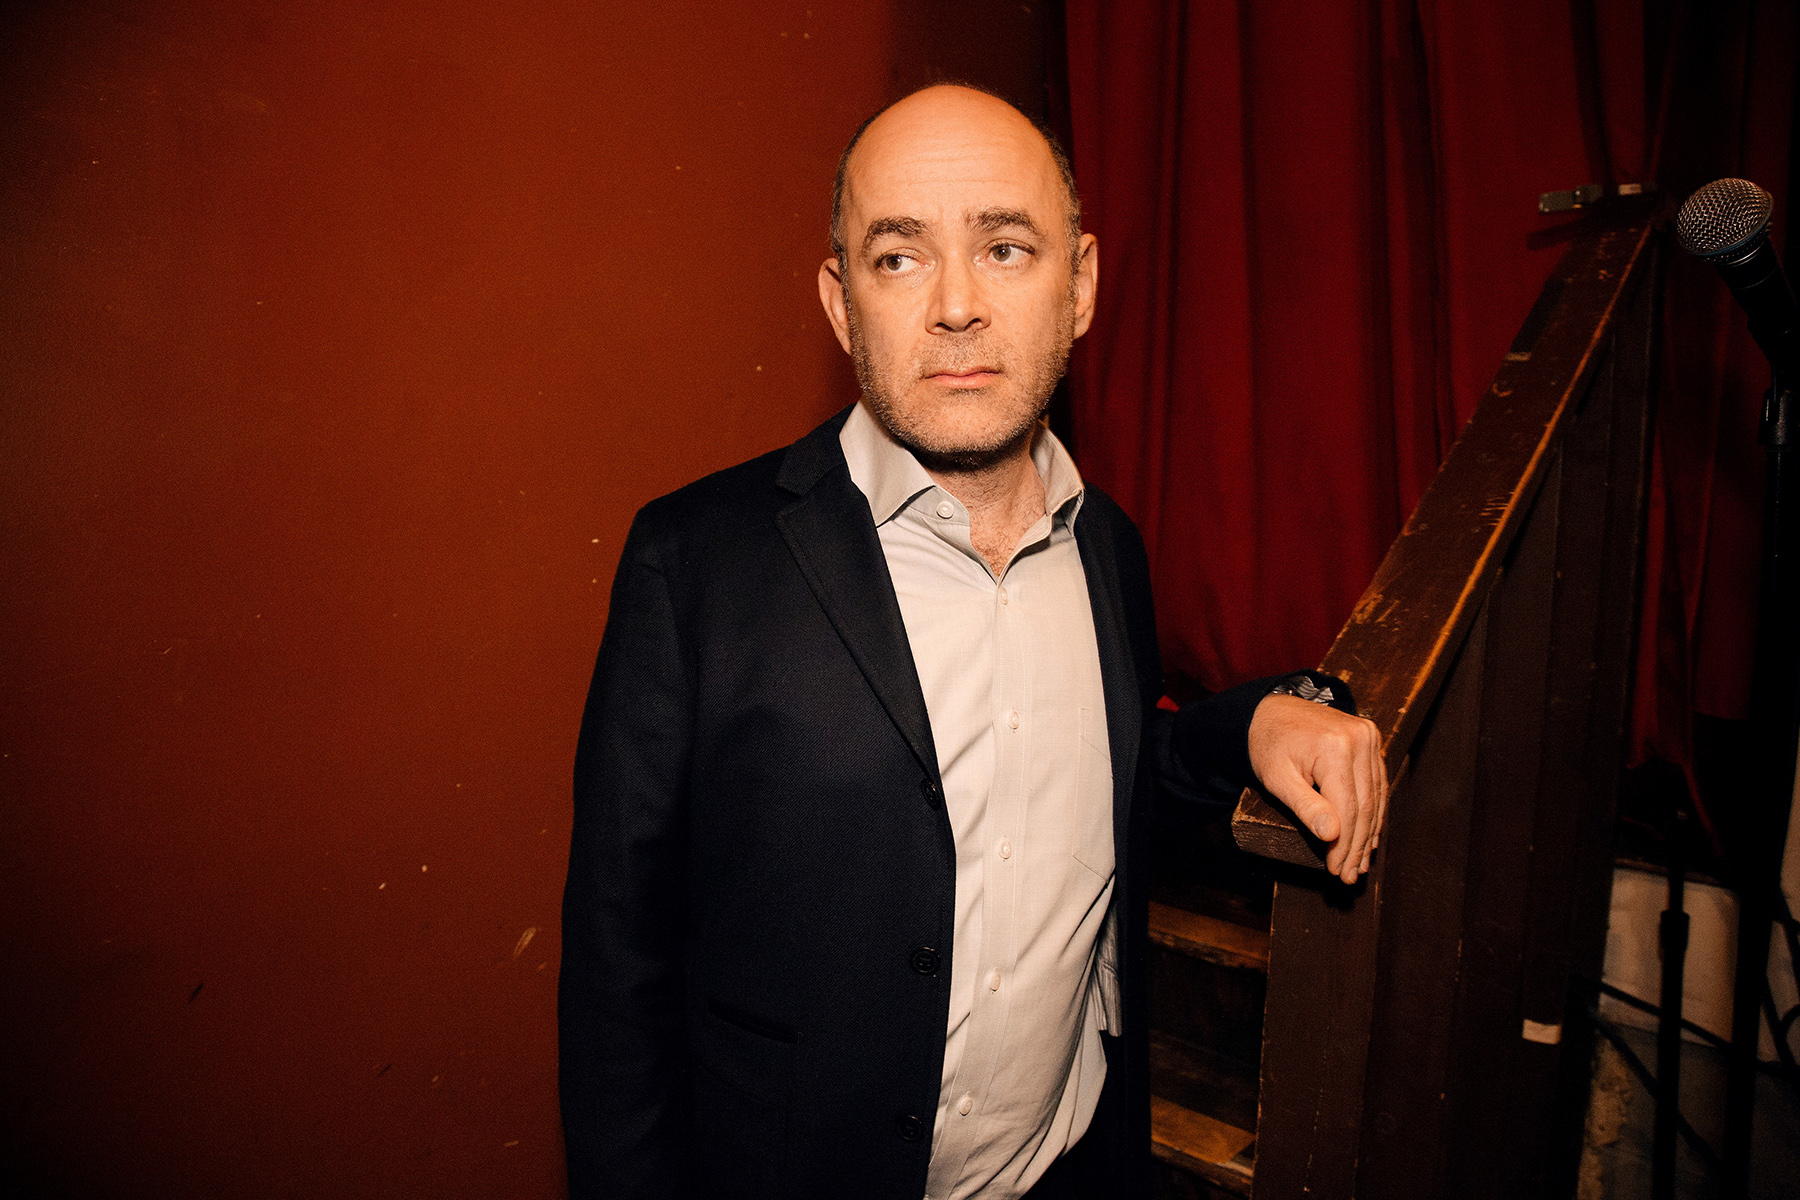 The Den Theatre Brings Comedian Todd Barry To Chicago On His 2022 Stadium Tour This Month